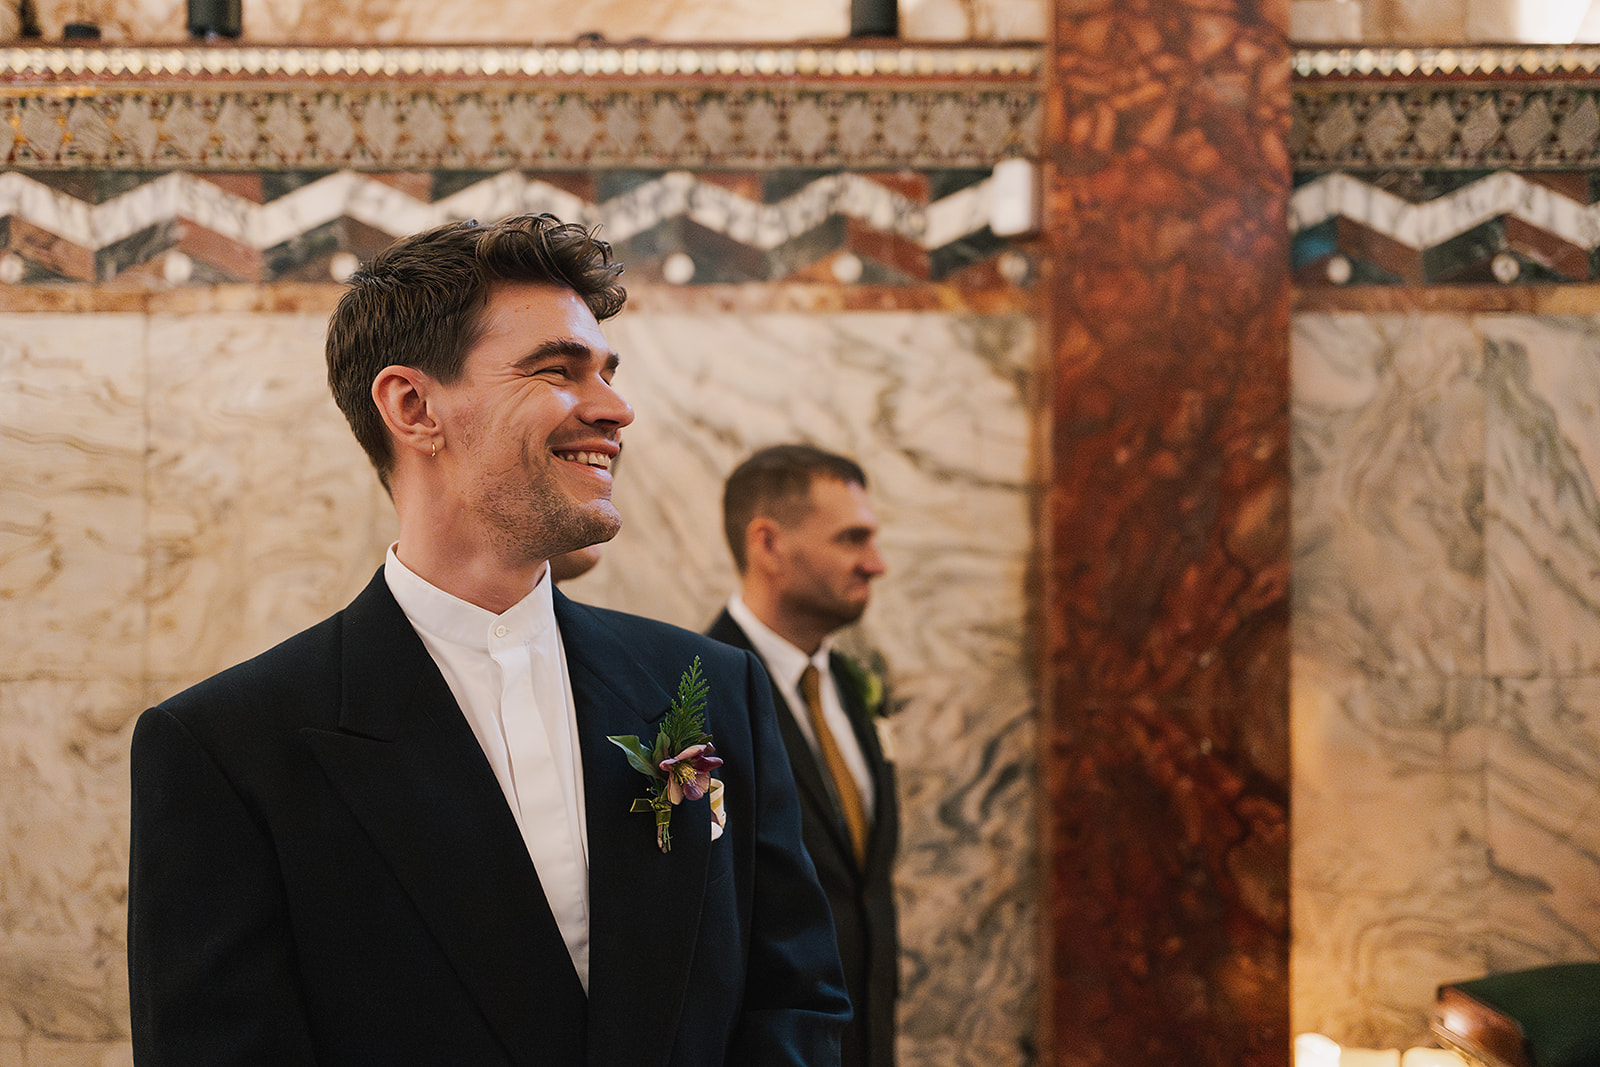 Groom waiting for bride at wedding ceremony at Fitzrovia Chapel